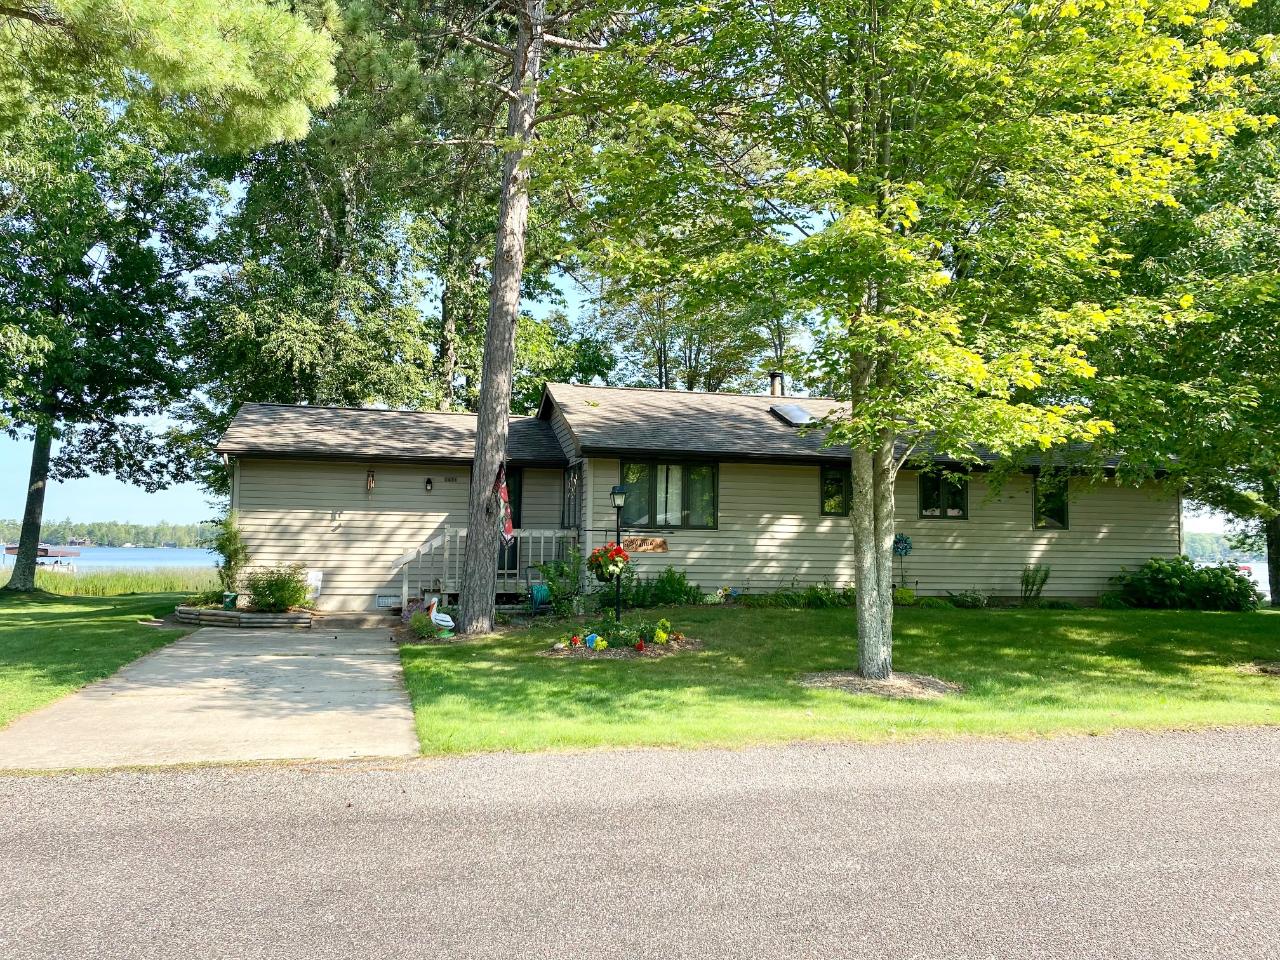 This year-round Pelican Lake house was built in 1986 with six-inch walls and added on in 1995. The lot is level with 100 feet of sand frontage 1.5 acre lot, a detached 2-car garage, a 14 x 20 garden shed, & a 8 x 10 storage shed by the waters edge. The great room has a wood-burning stove, ceiling fan, cathedral cedar ceiling, & cedar walls with large windows on the lakeside. The kitchen is spacious with plenty of cabinets and is open to the dining area. There are 3 bedrooms (two with lakeside windows) and a full bath on one end of the home. The den (spacious guest room) enjoys a lakeside window and the laundry room/ ½ bath is close by. This property comes with furniture, dock, pontoon, & shore station. Pelican Lake has 3585 acres of full recreation water to fish, pontoon, ski & swim, 2 restaurants/bars to boat to, and some of the best lake neighbors you could ask​​‌​​​​‌​​‌‌​‌‌‌​​‌‌​‌‌‌​​‌‌​‌‌‌ for. pontoon, shore station,dock,& furniture included. 2000 gallon holding tank, crawl space access in closet in the laundry room, concrete floor, 2x6 walls